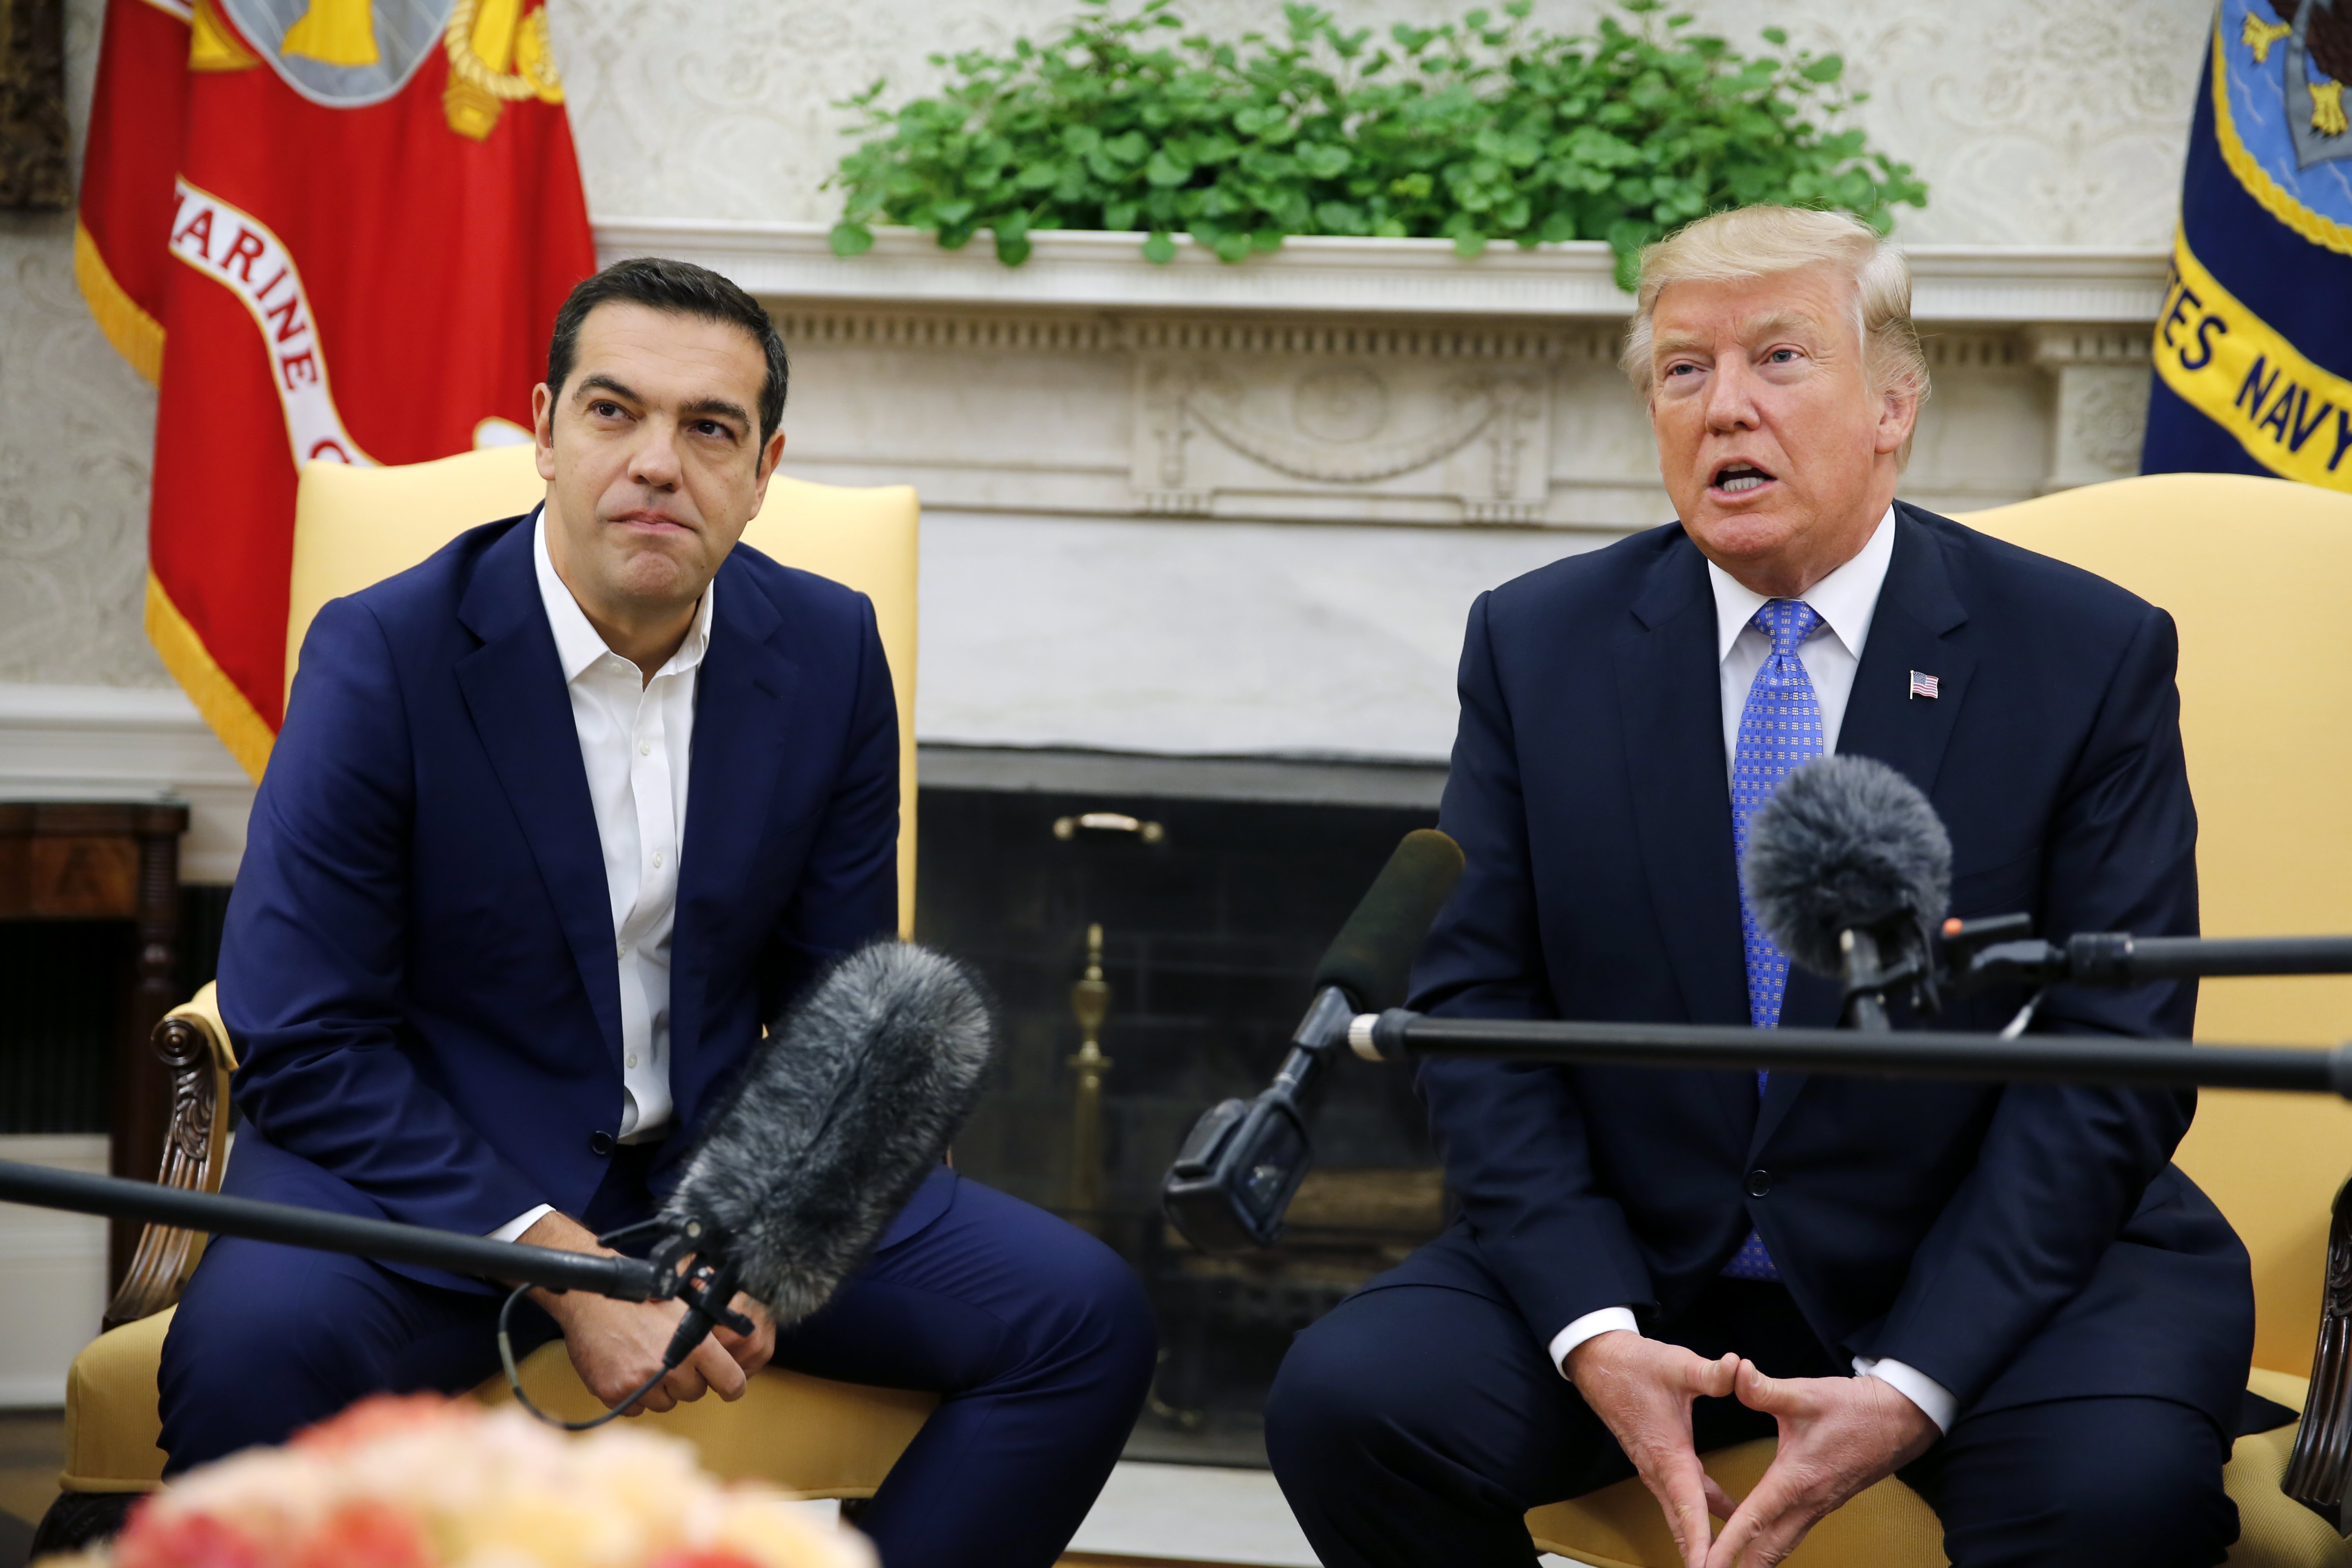 epa06271531 US President Donald J. Trump meets with Greek Prime Minister Alexis Tsipras in the Oval Office of the White House, in Washington, DC, USA, 17 October 2017.  EPA/Martin H. Simon / POOL